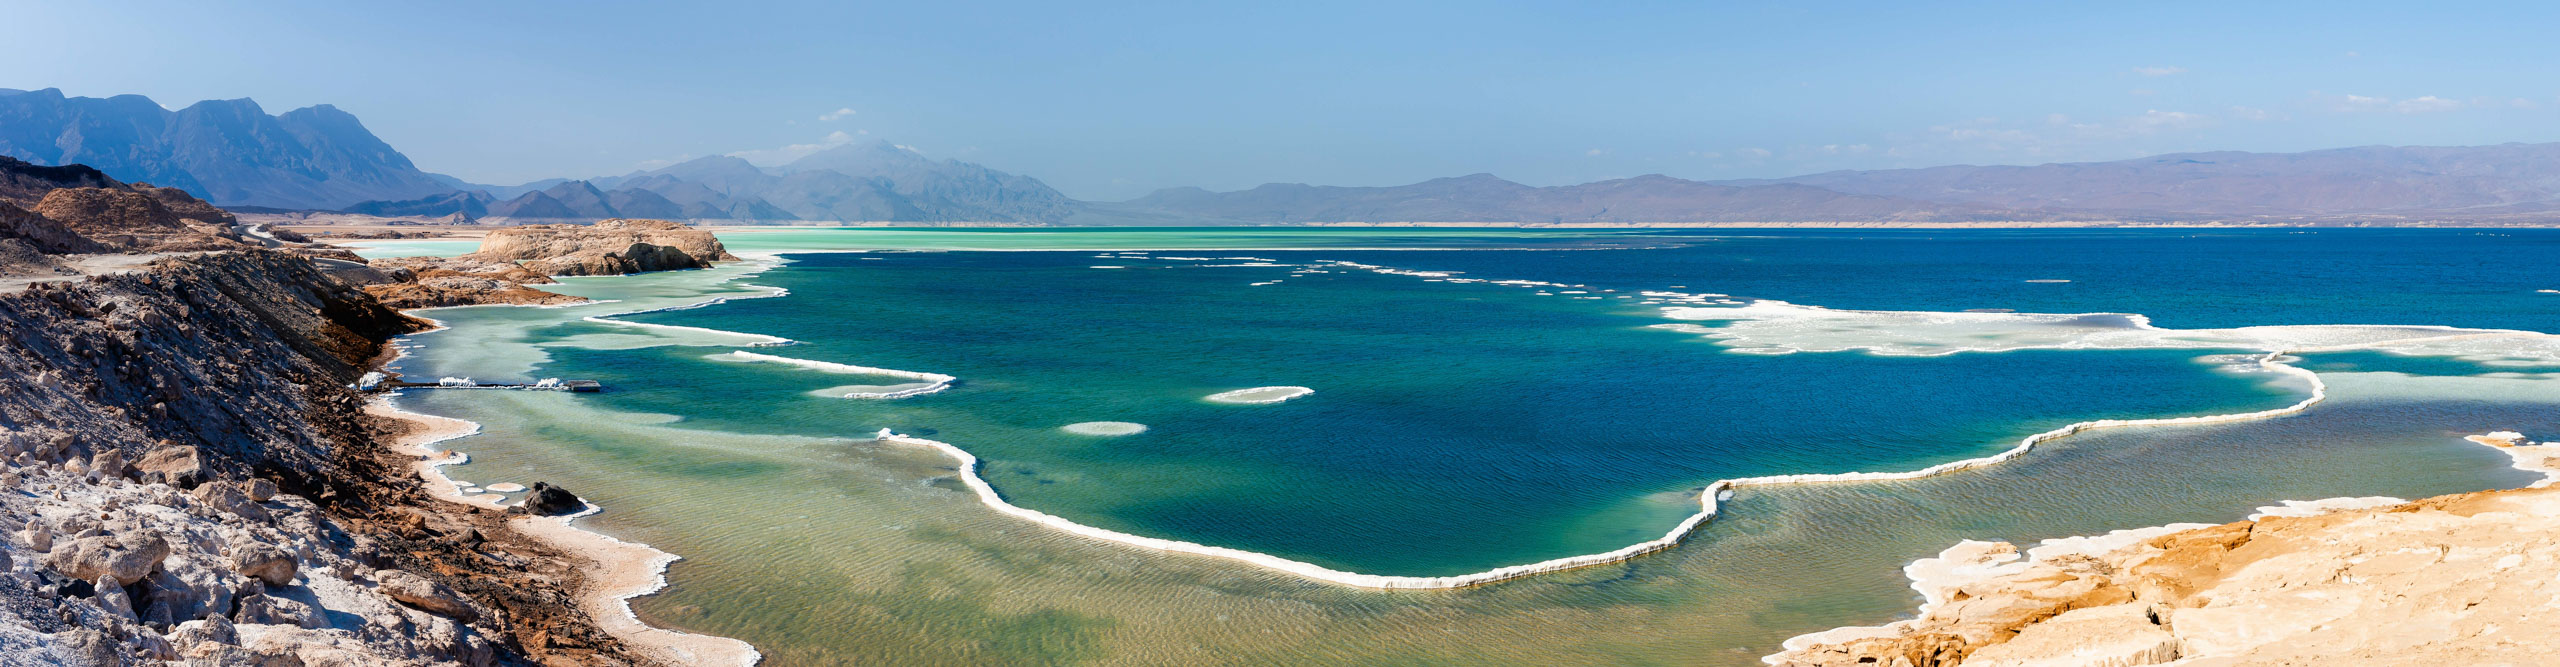 Salty Coastline of the Blue Lake Assal, with mountains in the distance, Djibouti, Africa